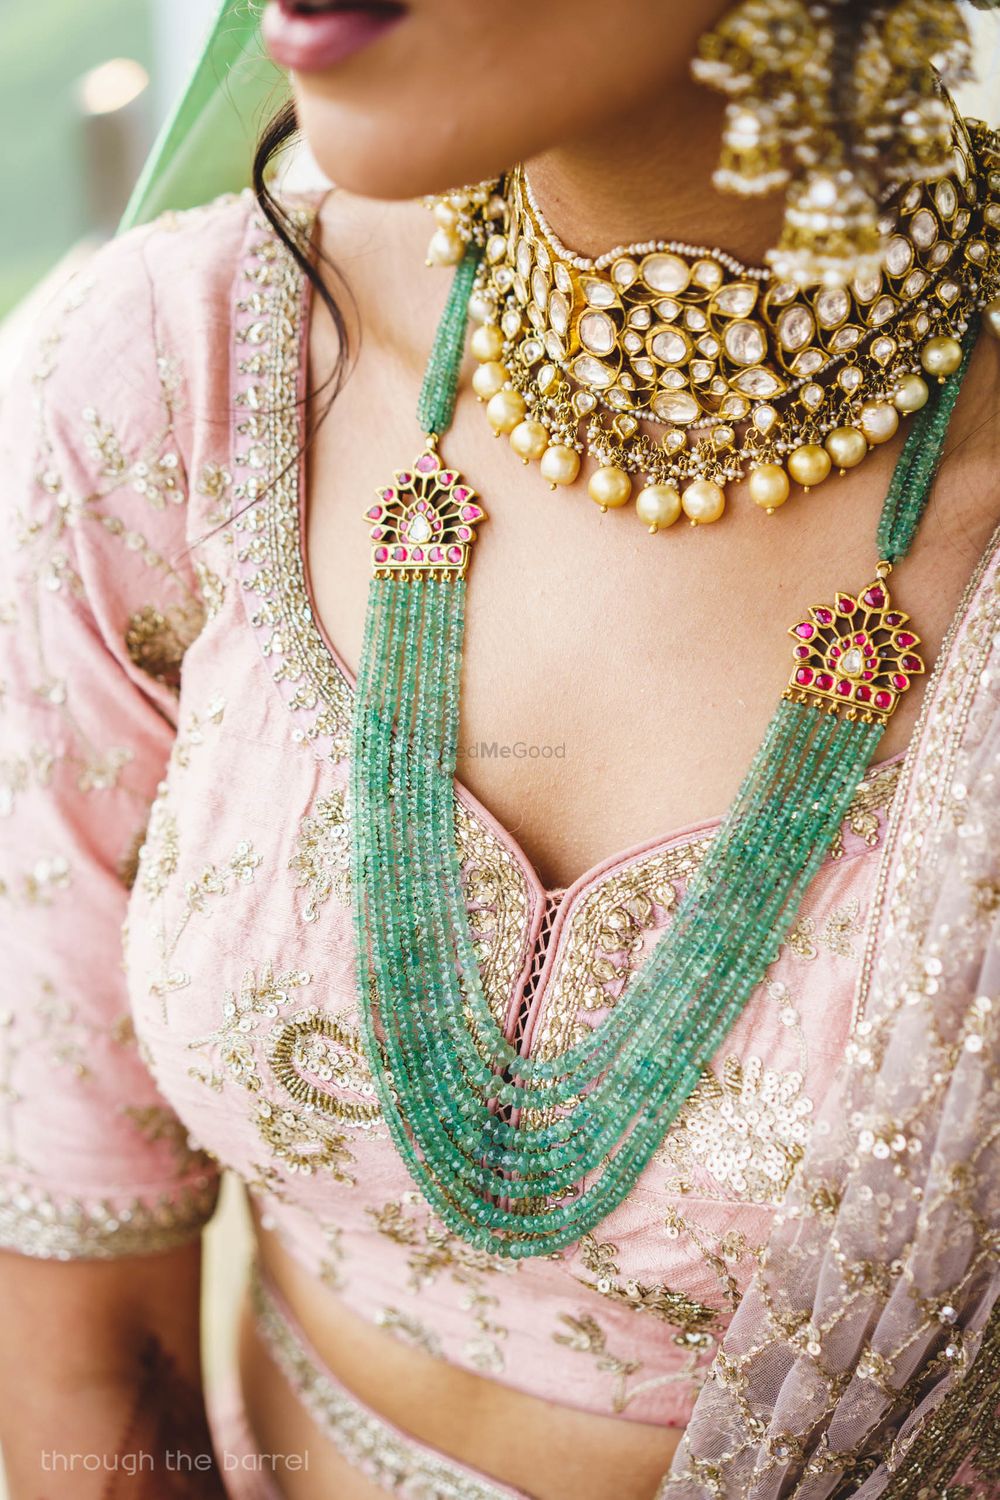 Photo of Sweetheart neckline green bead necklace